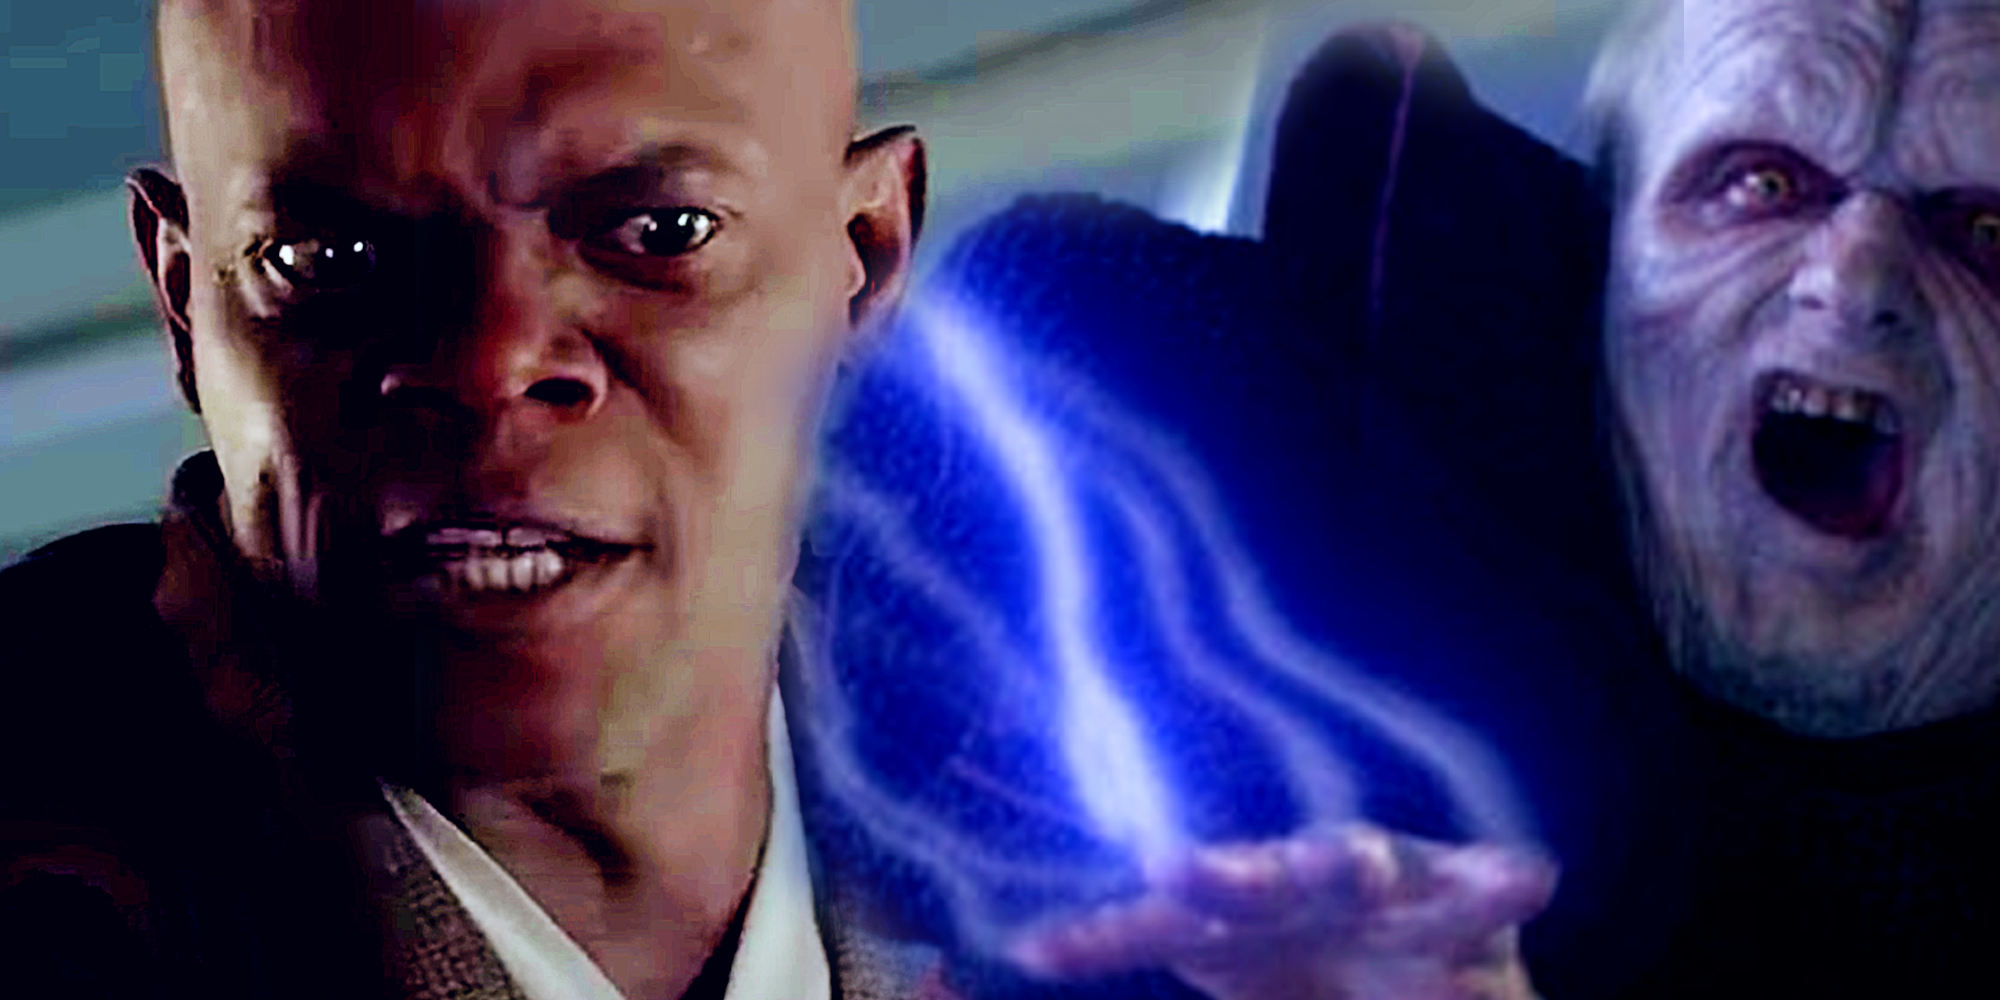 Mace Windu and Palpatine - Boba Fett Actor Reveals Mace Windu is At The Top of His Assassination List